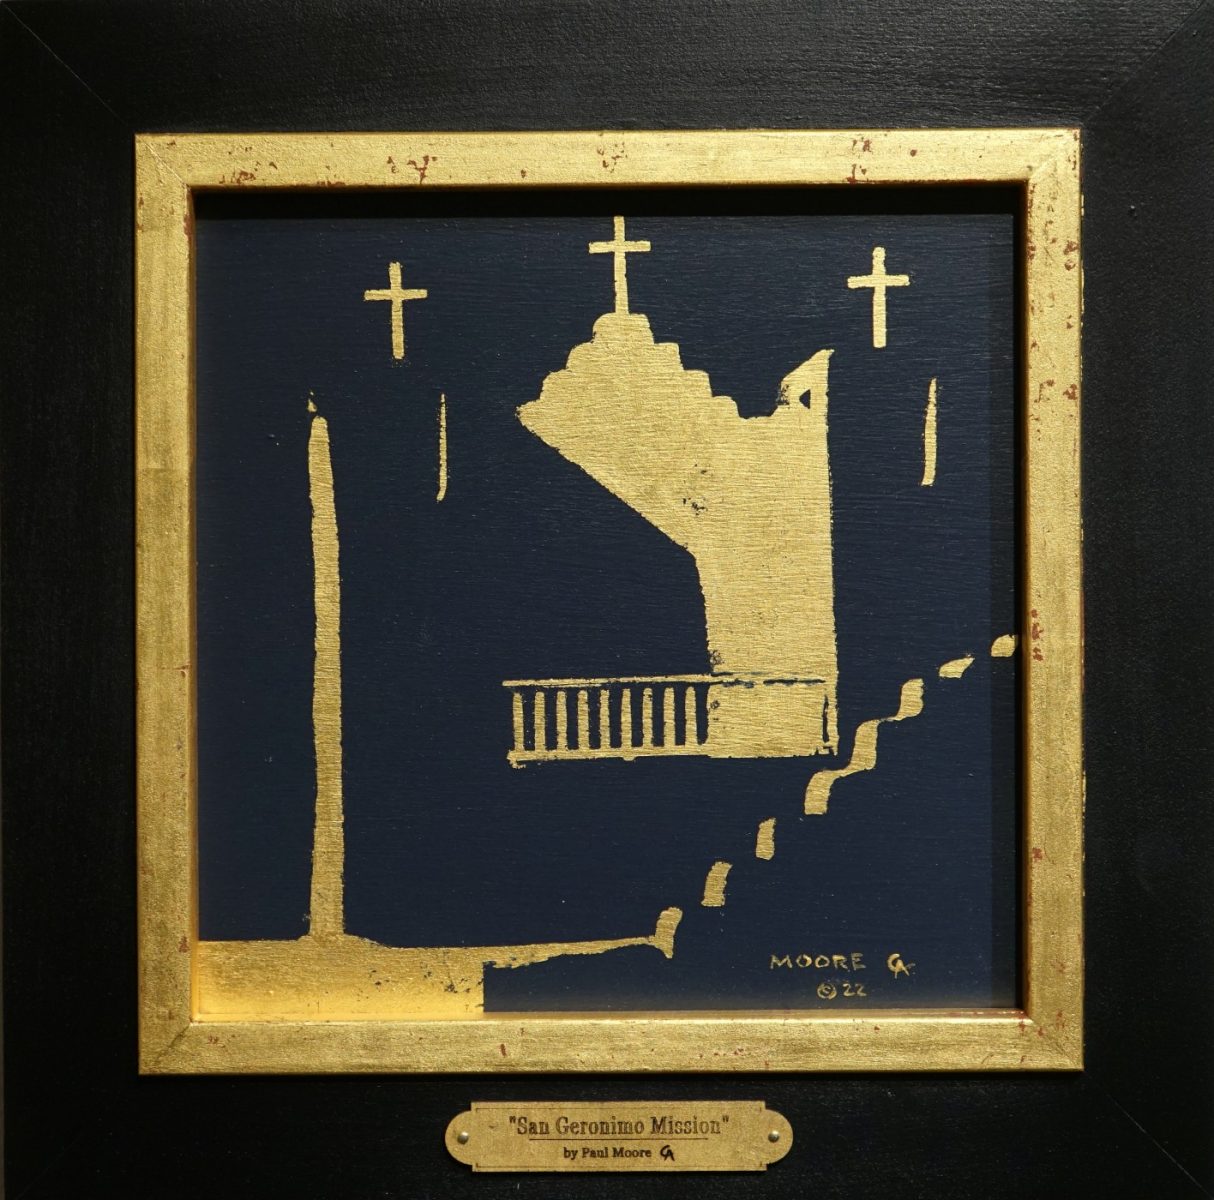 Gold leaf painting of New Mexico Mission by Paul Moore